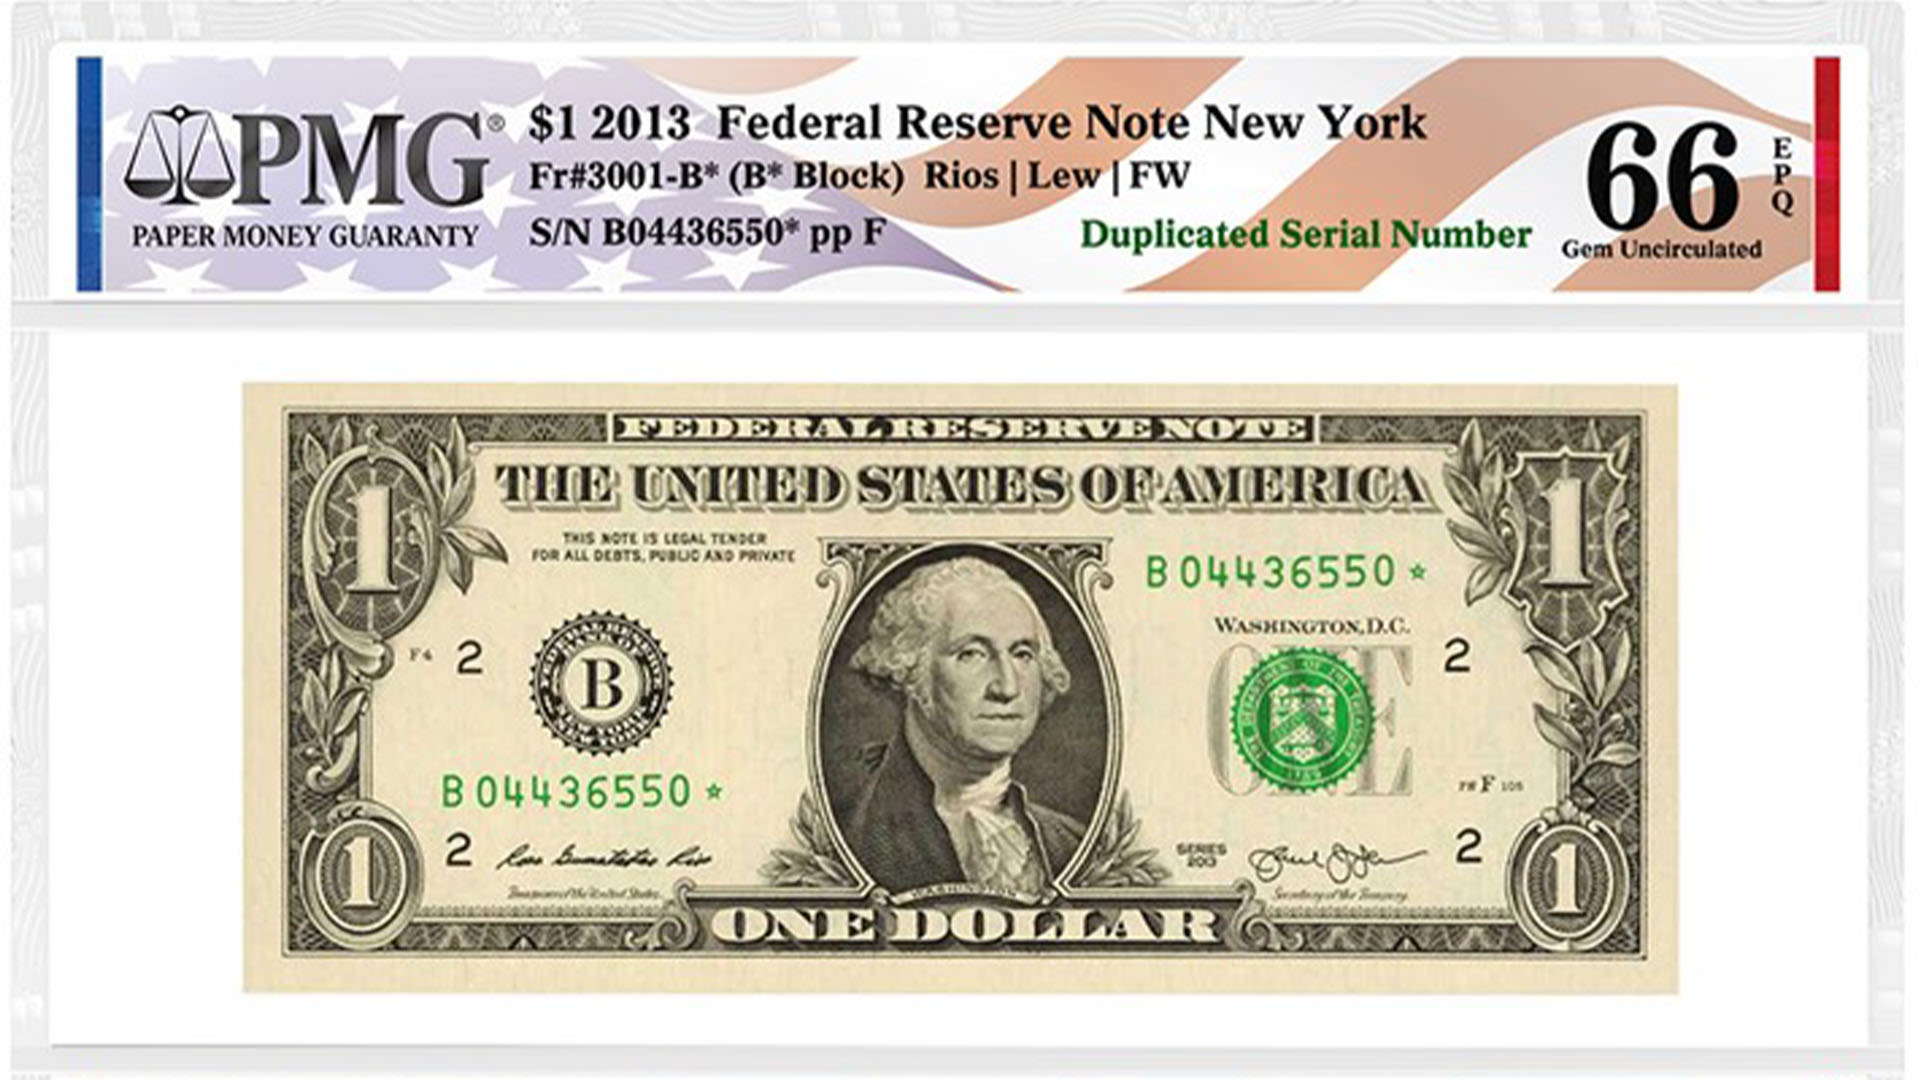 Your $1 bills may be worth $6,000 due to silly printing error - what to look for